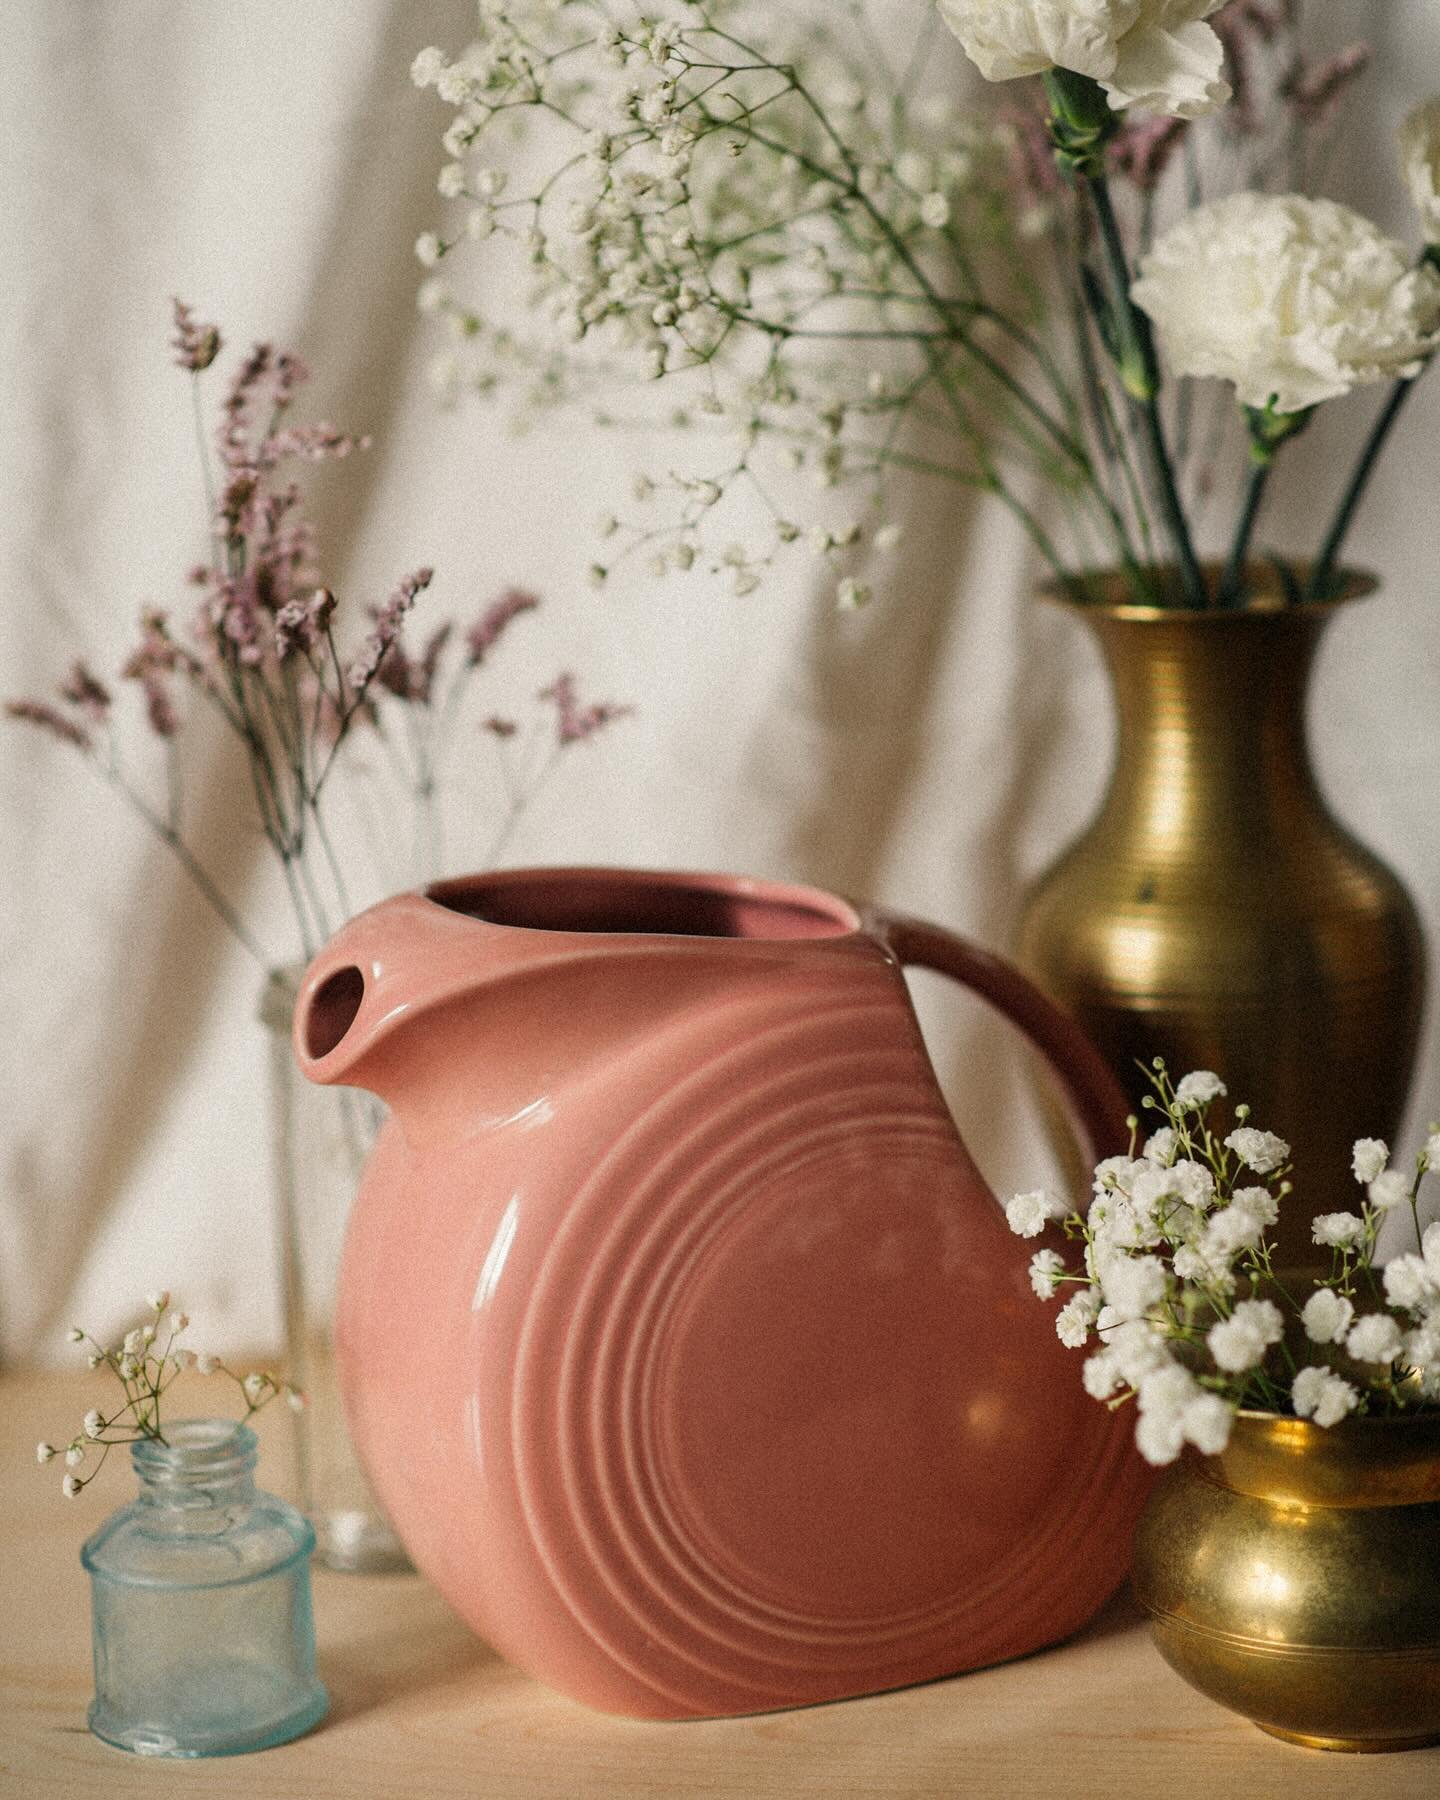 If you&rsquo;re picking up flowers for Mother&rsquo;s Day (or any day for that matter&mdash;flowers are an anytime thing that shouldn&rsquo;t be limited to a specific day), don&rsquo;t forget a fun vase!

Find a pitcher that can hold flowers for now 